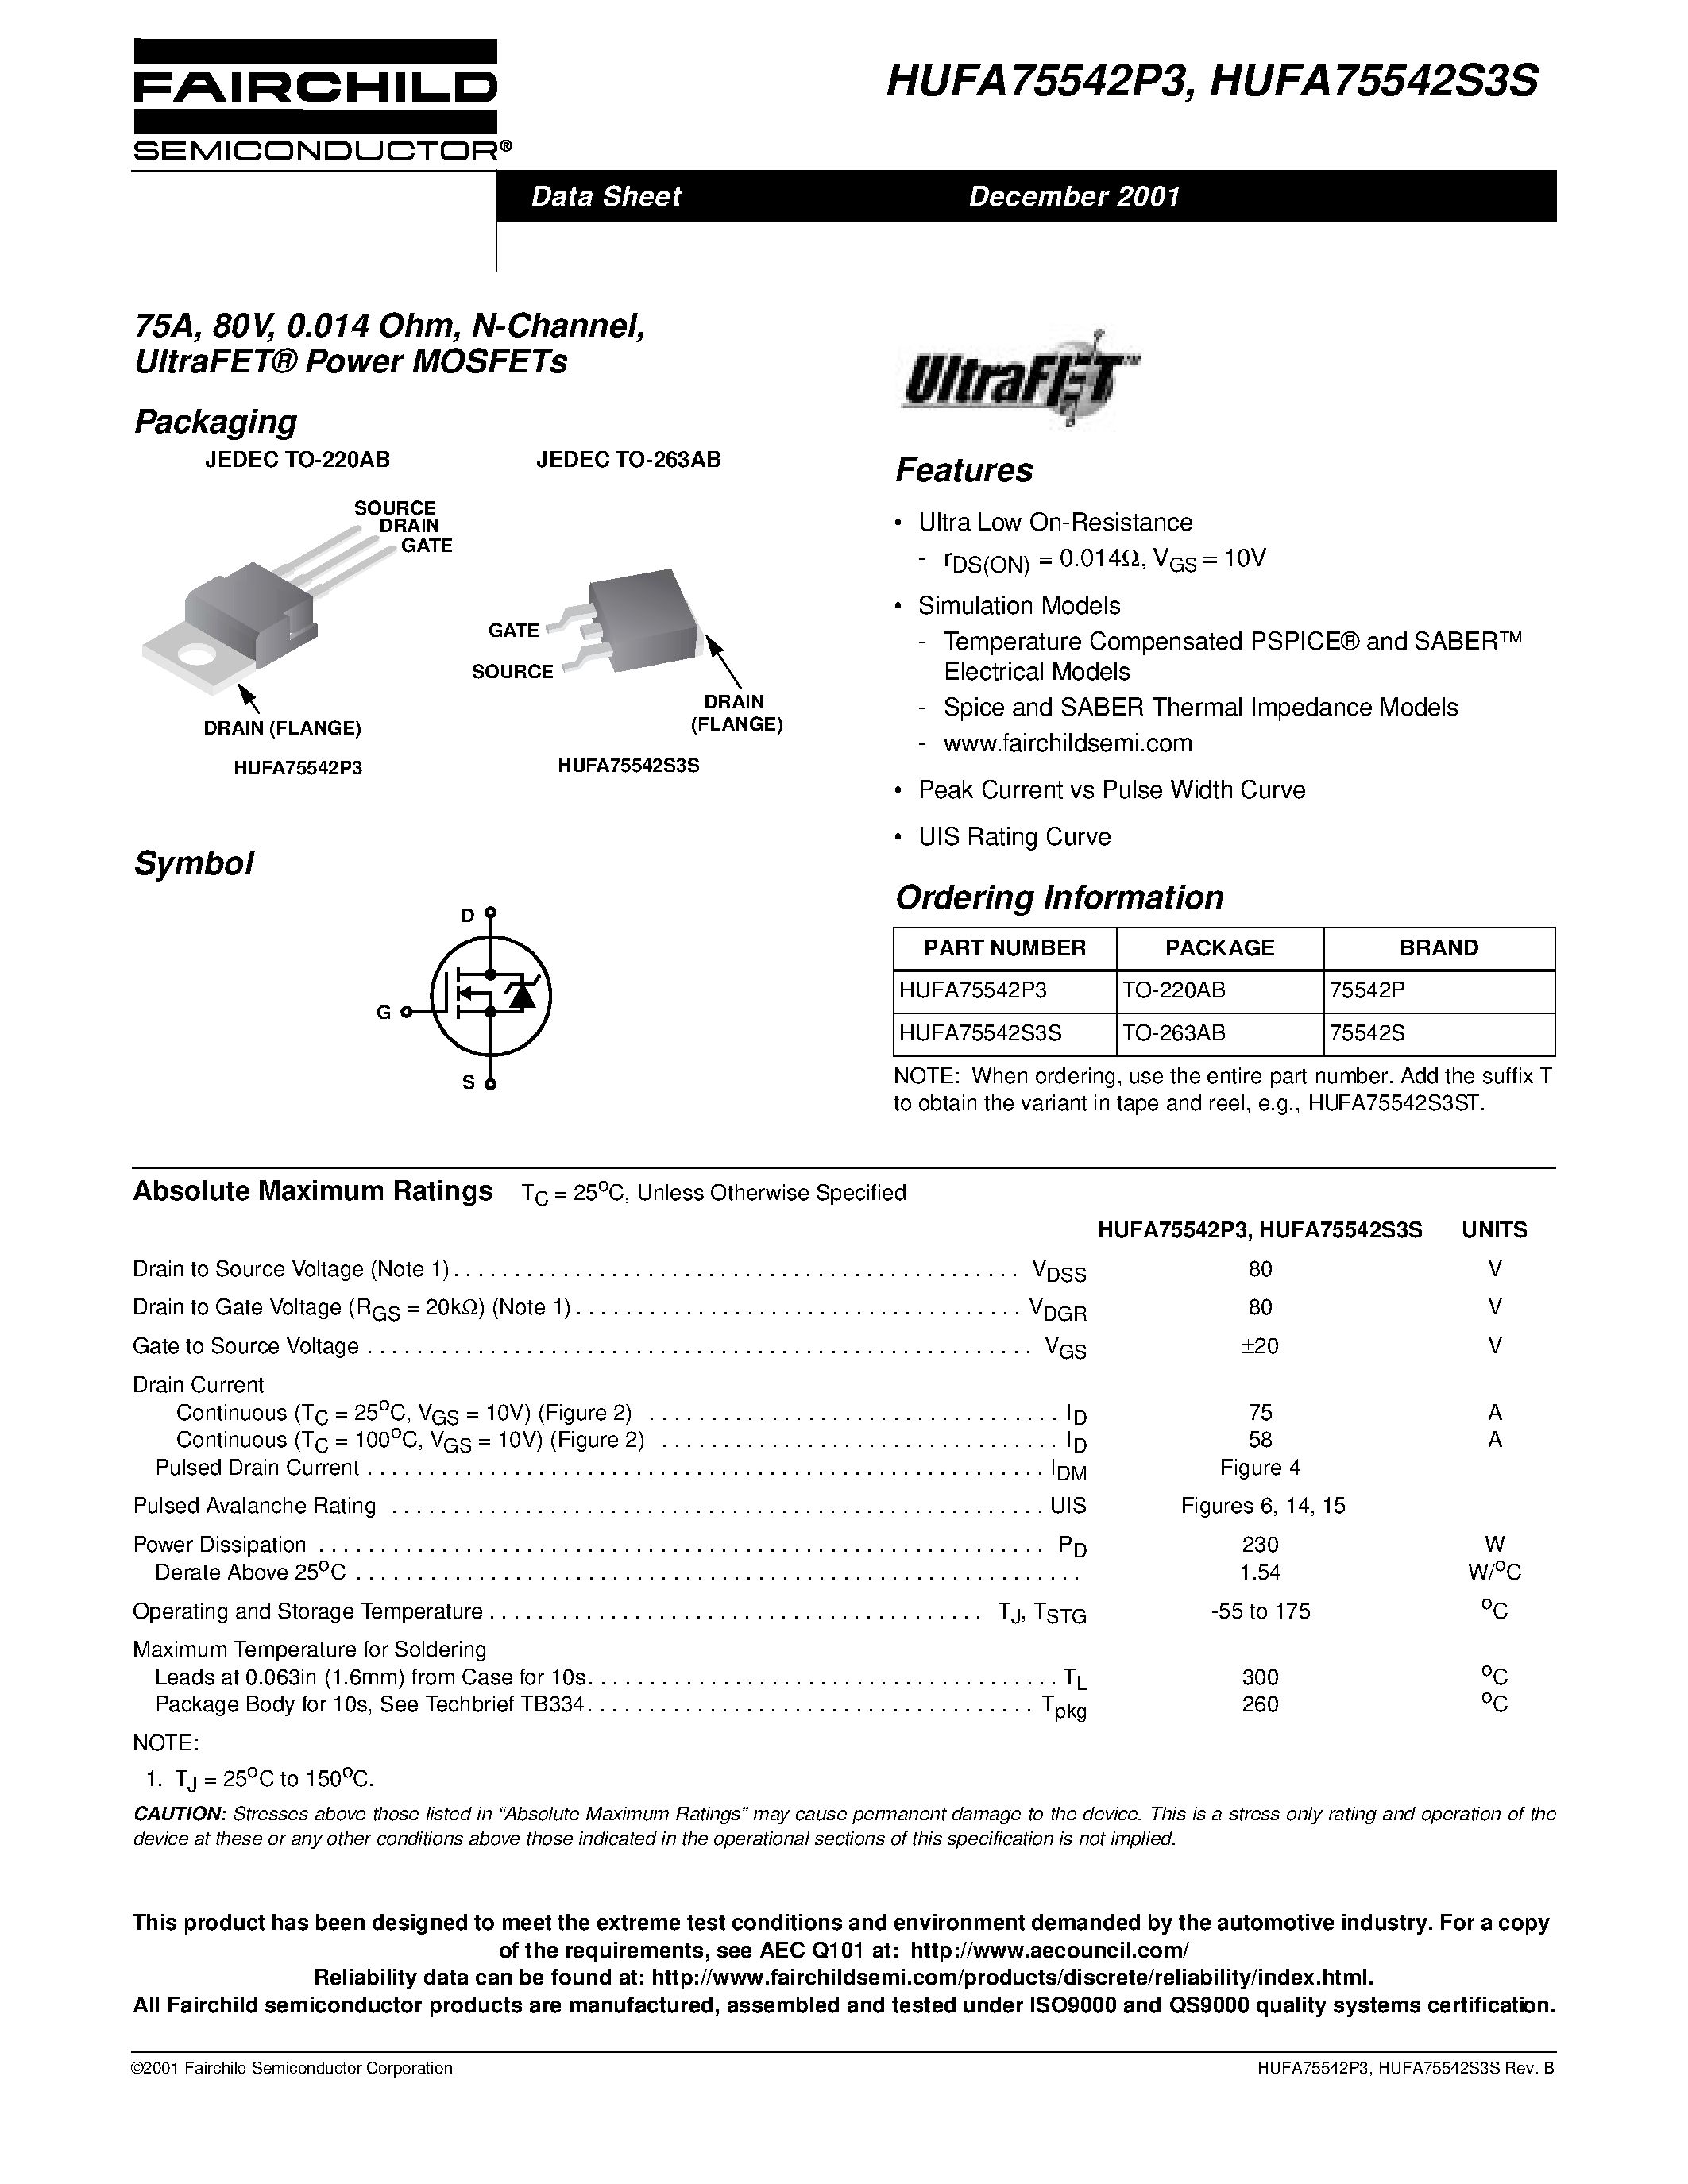 Datasheet HUFA75542S3S - 75A/ 80V/ 0.014 Ohm/ N-Channel/ UltraFET Power MOSFETs page 1